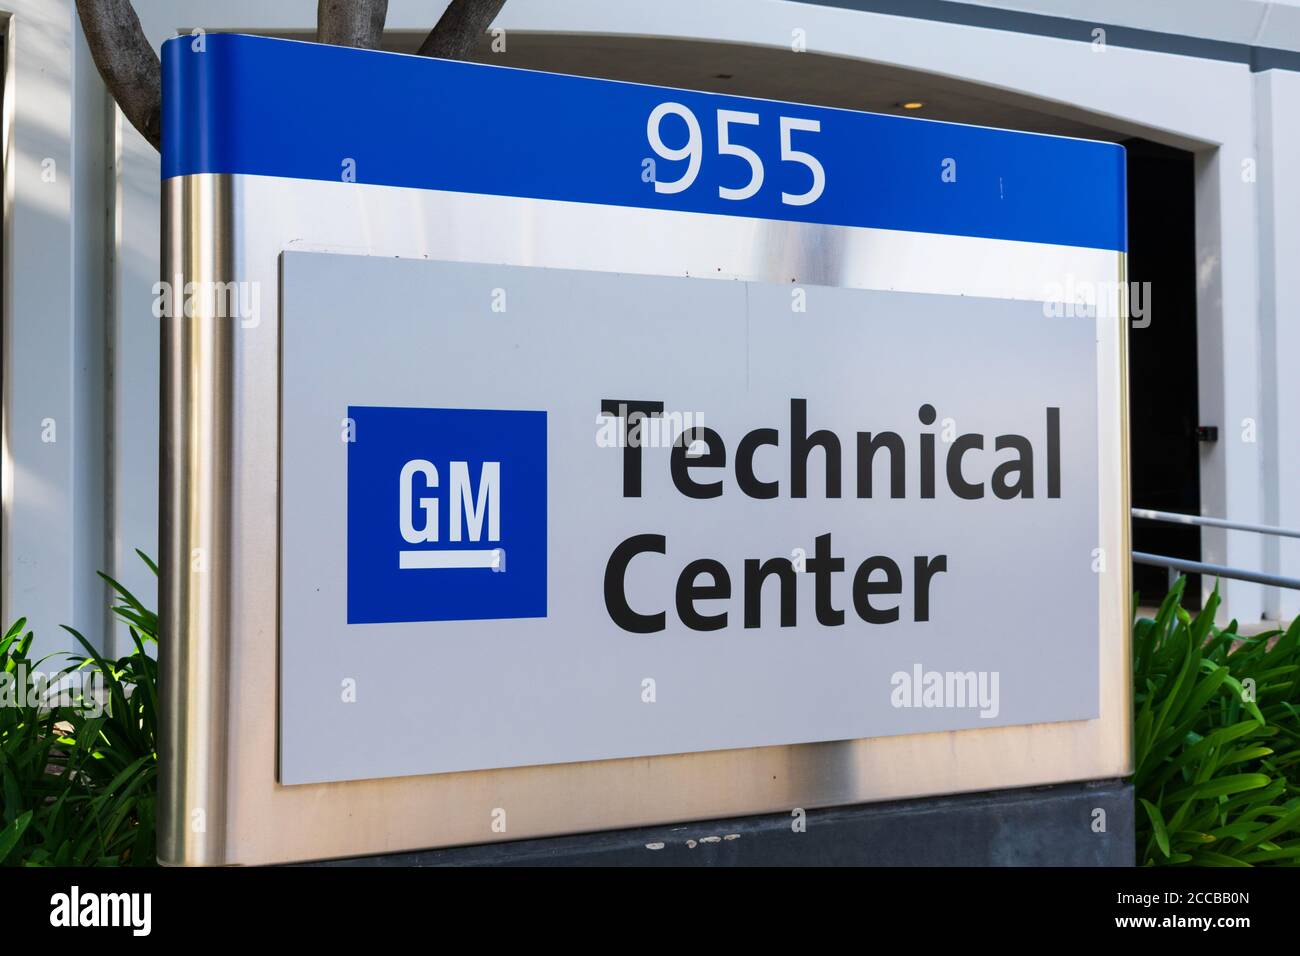 General Motors, GM, logo at Silicon Valley Technical Center campus - Sunnyvale, CA, USA - 2020 Stock Photo